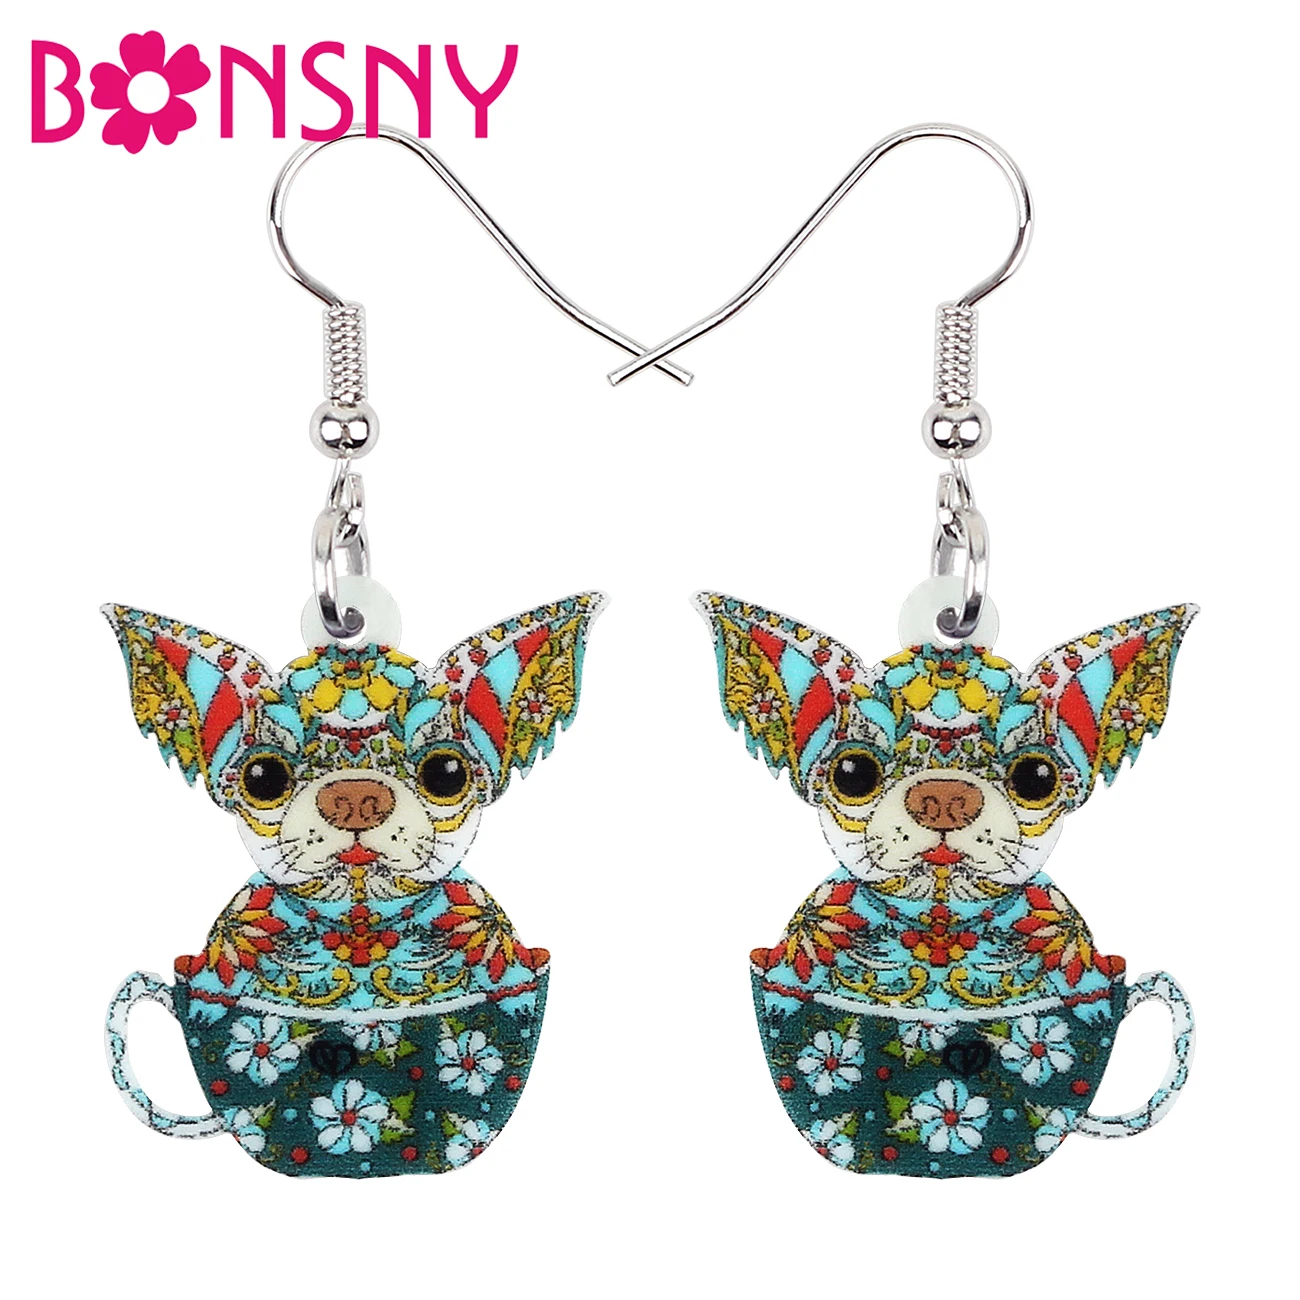 

BONSNY Acrylic Floral Chihuahua Cup Dog Earrings Long Drop Dangle Fashion Pets Jewelry For Women Girls Party Teens Gifts